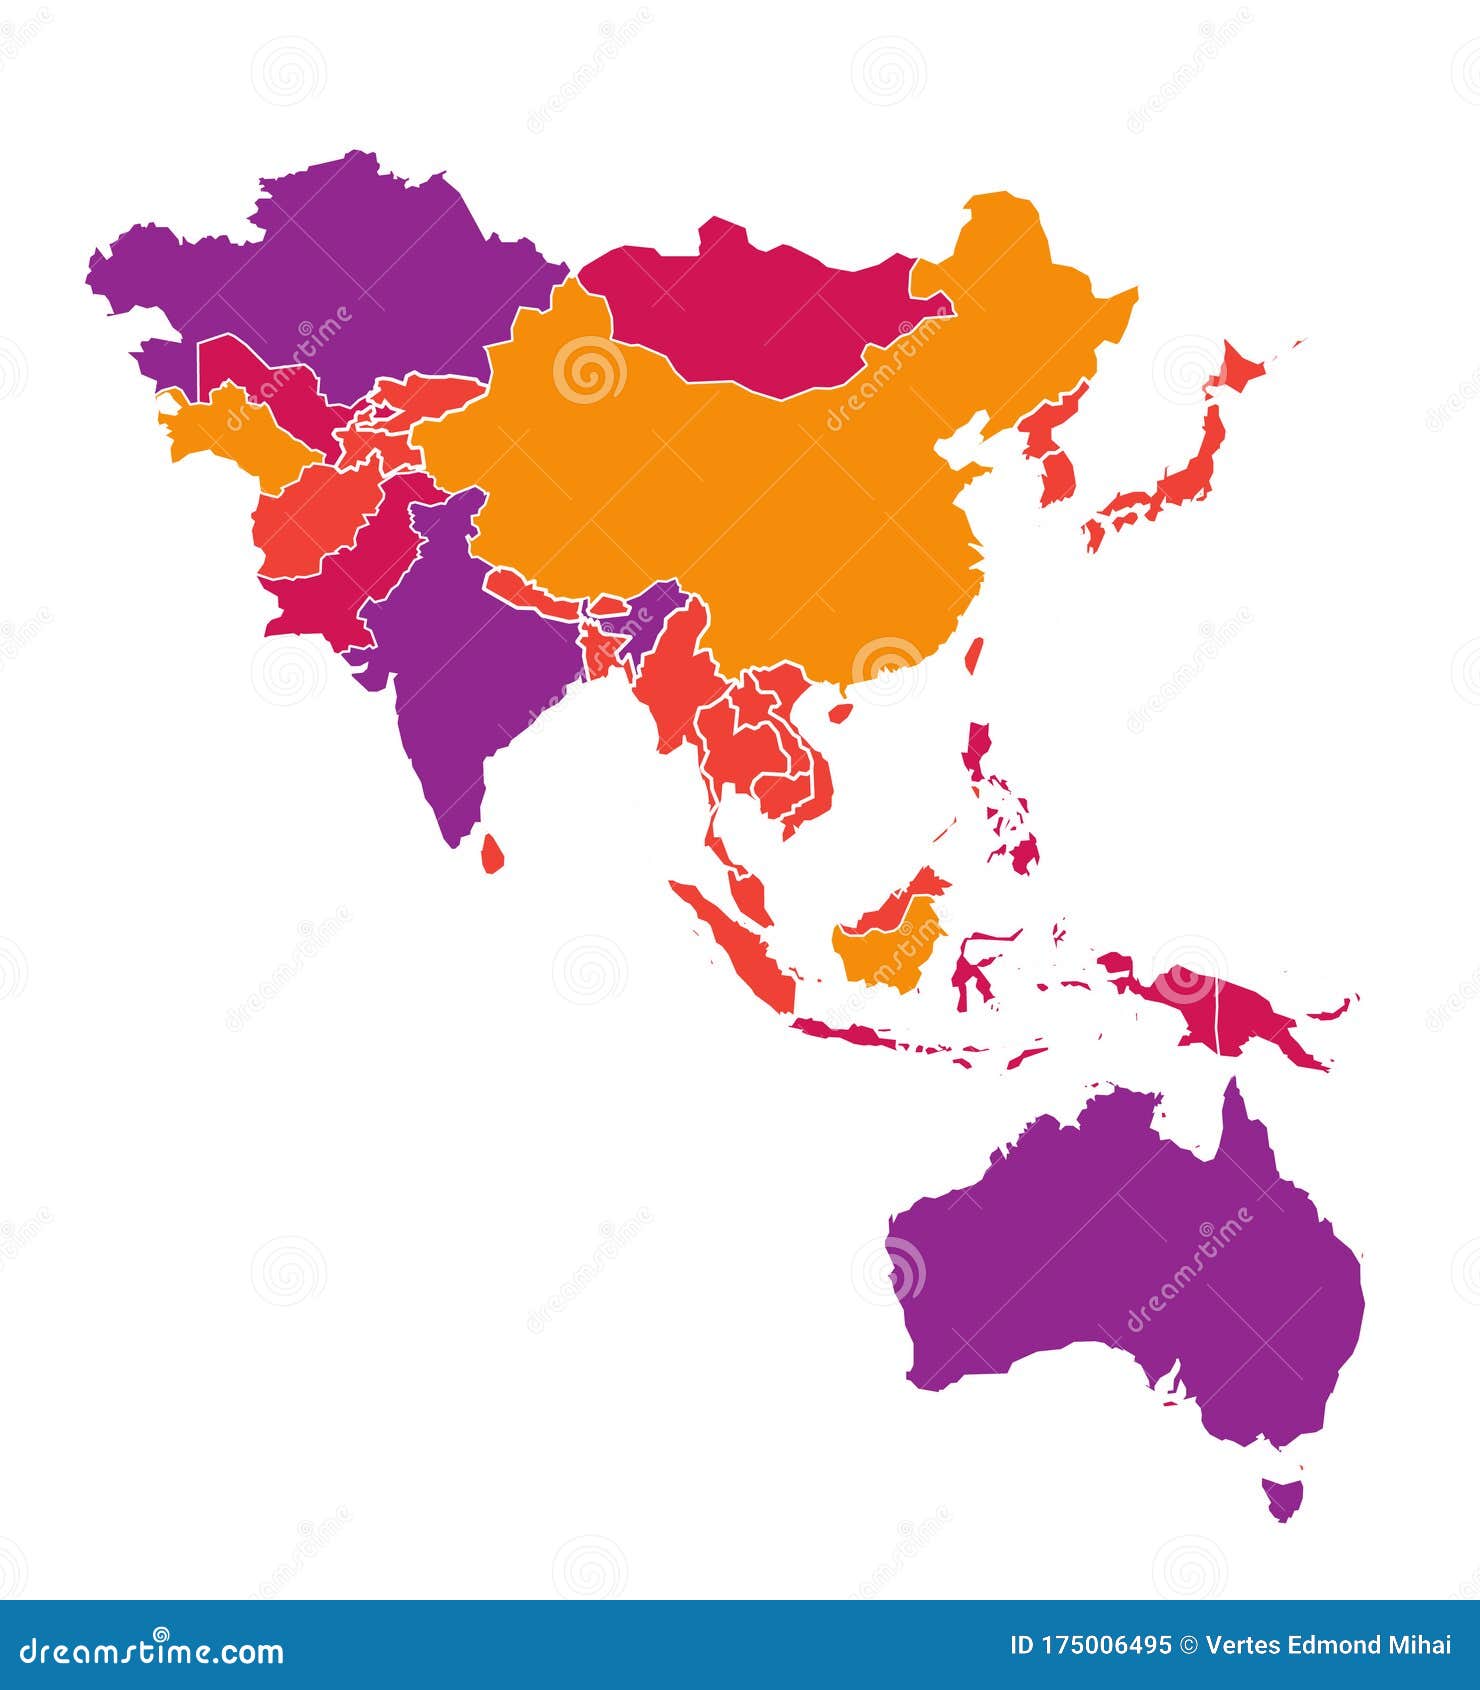 colored detailed  map of asia pacific region